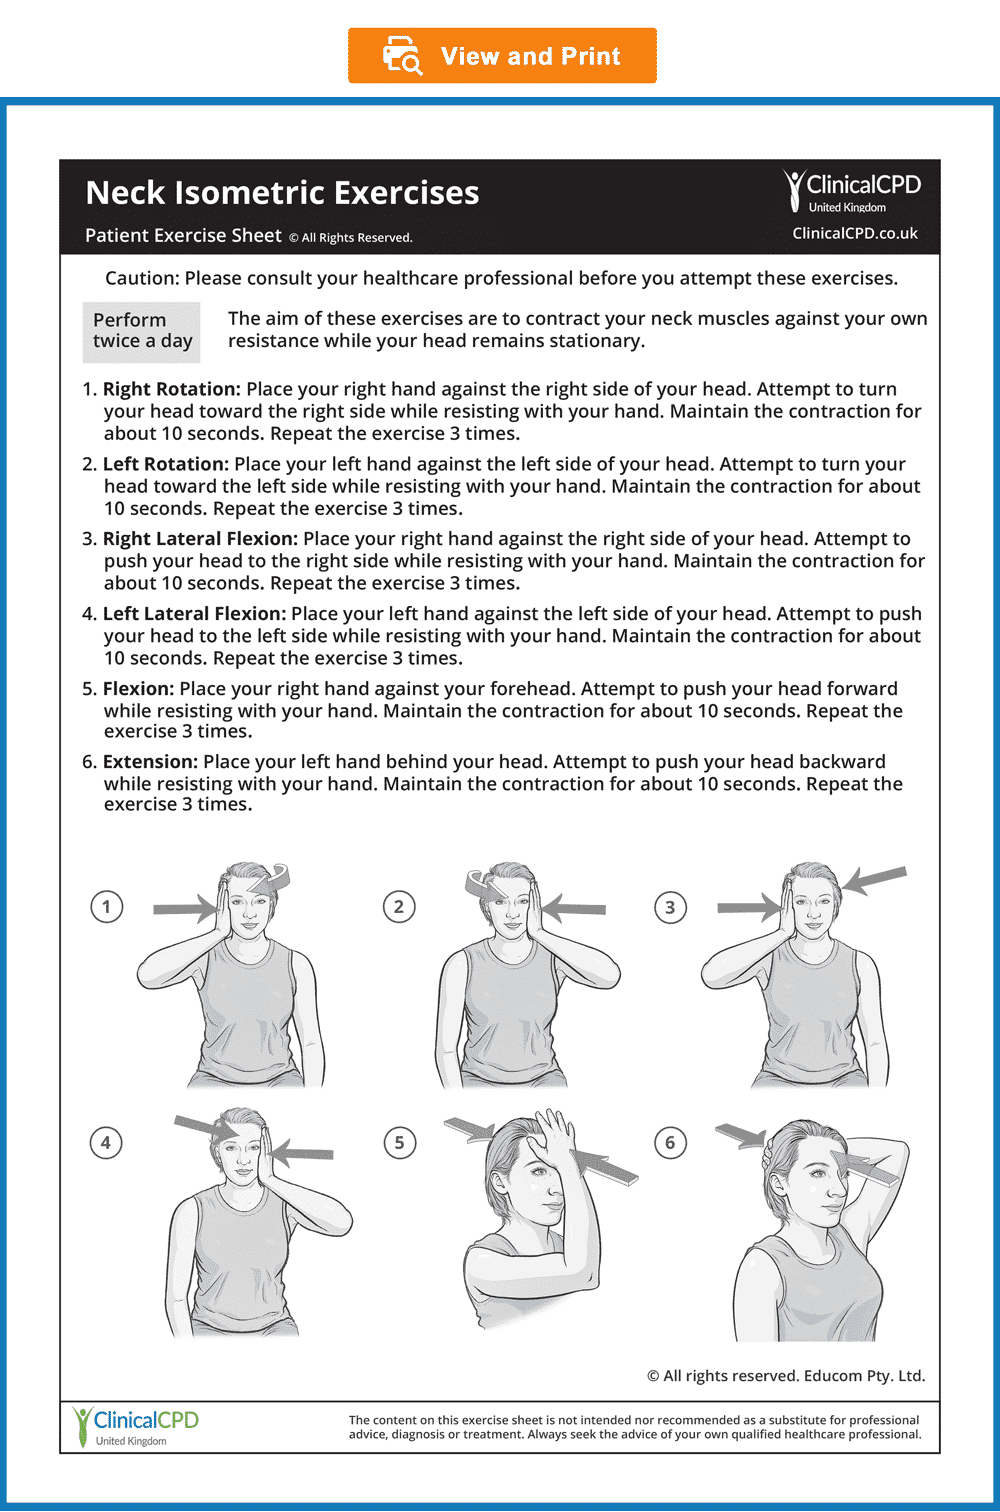 https://www.clinicalcpd.co.uk/wp-content/uploads/2022/12/Neck-Isometric-Exercises-UK-1-2-1.png